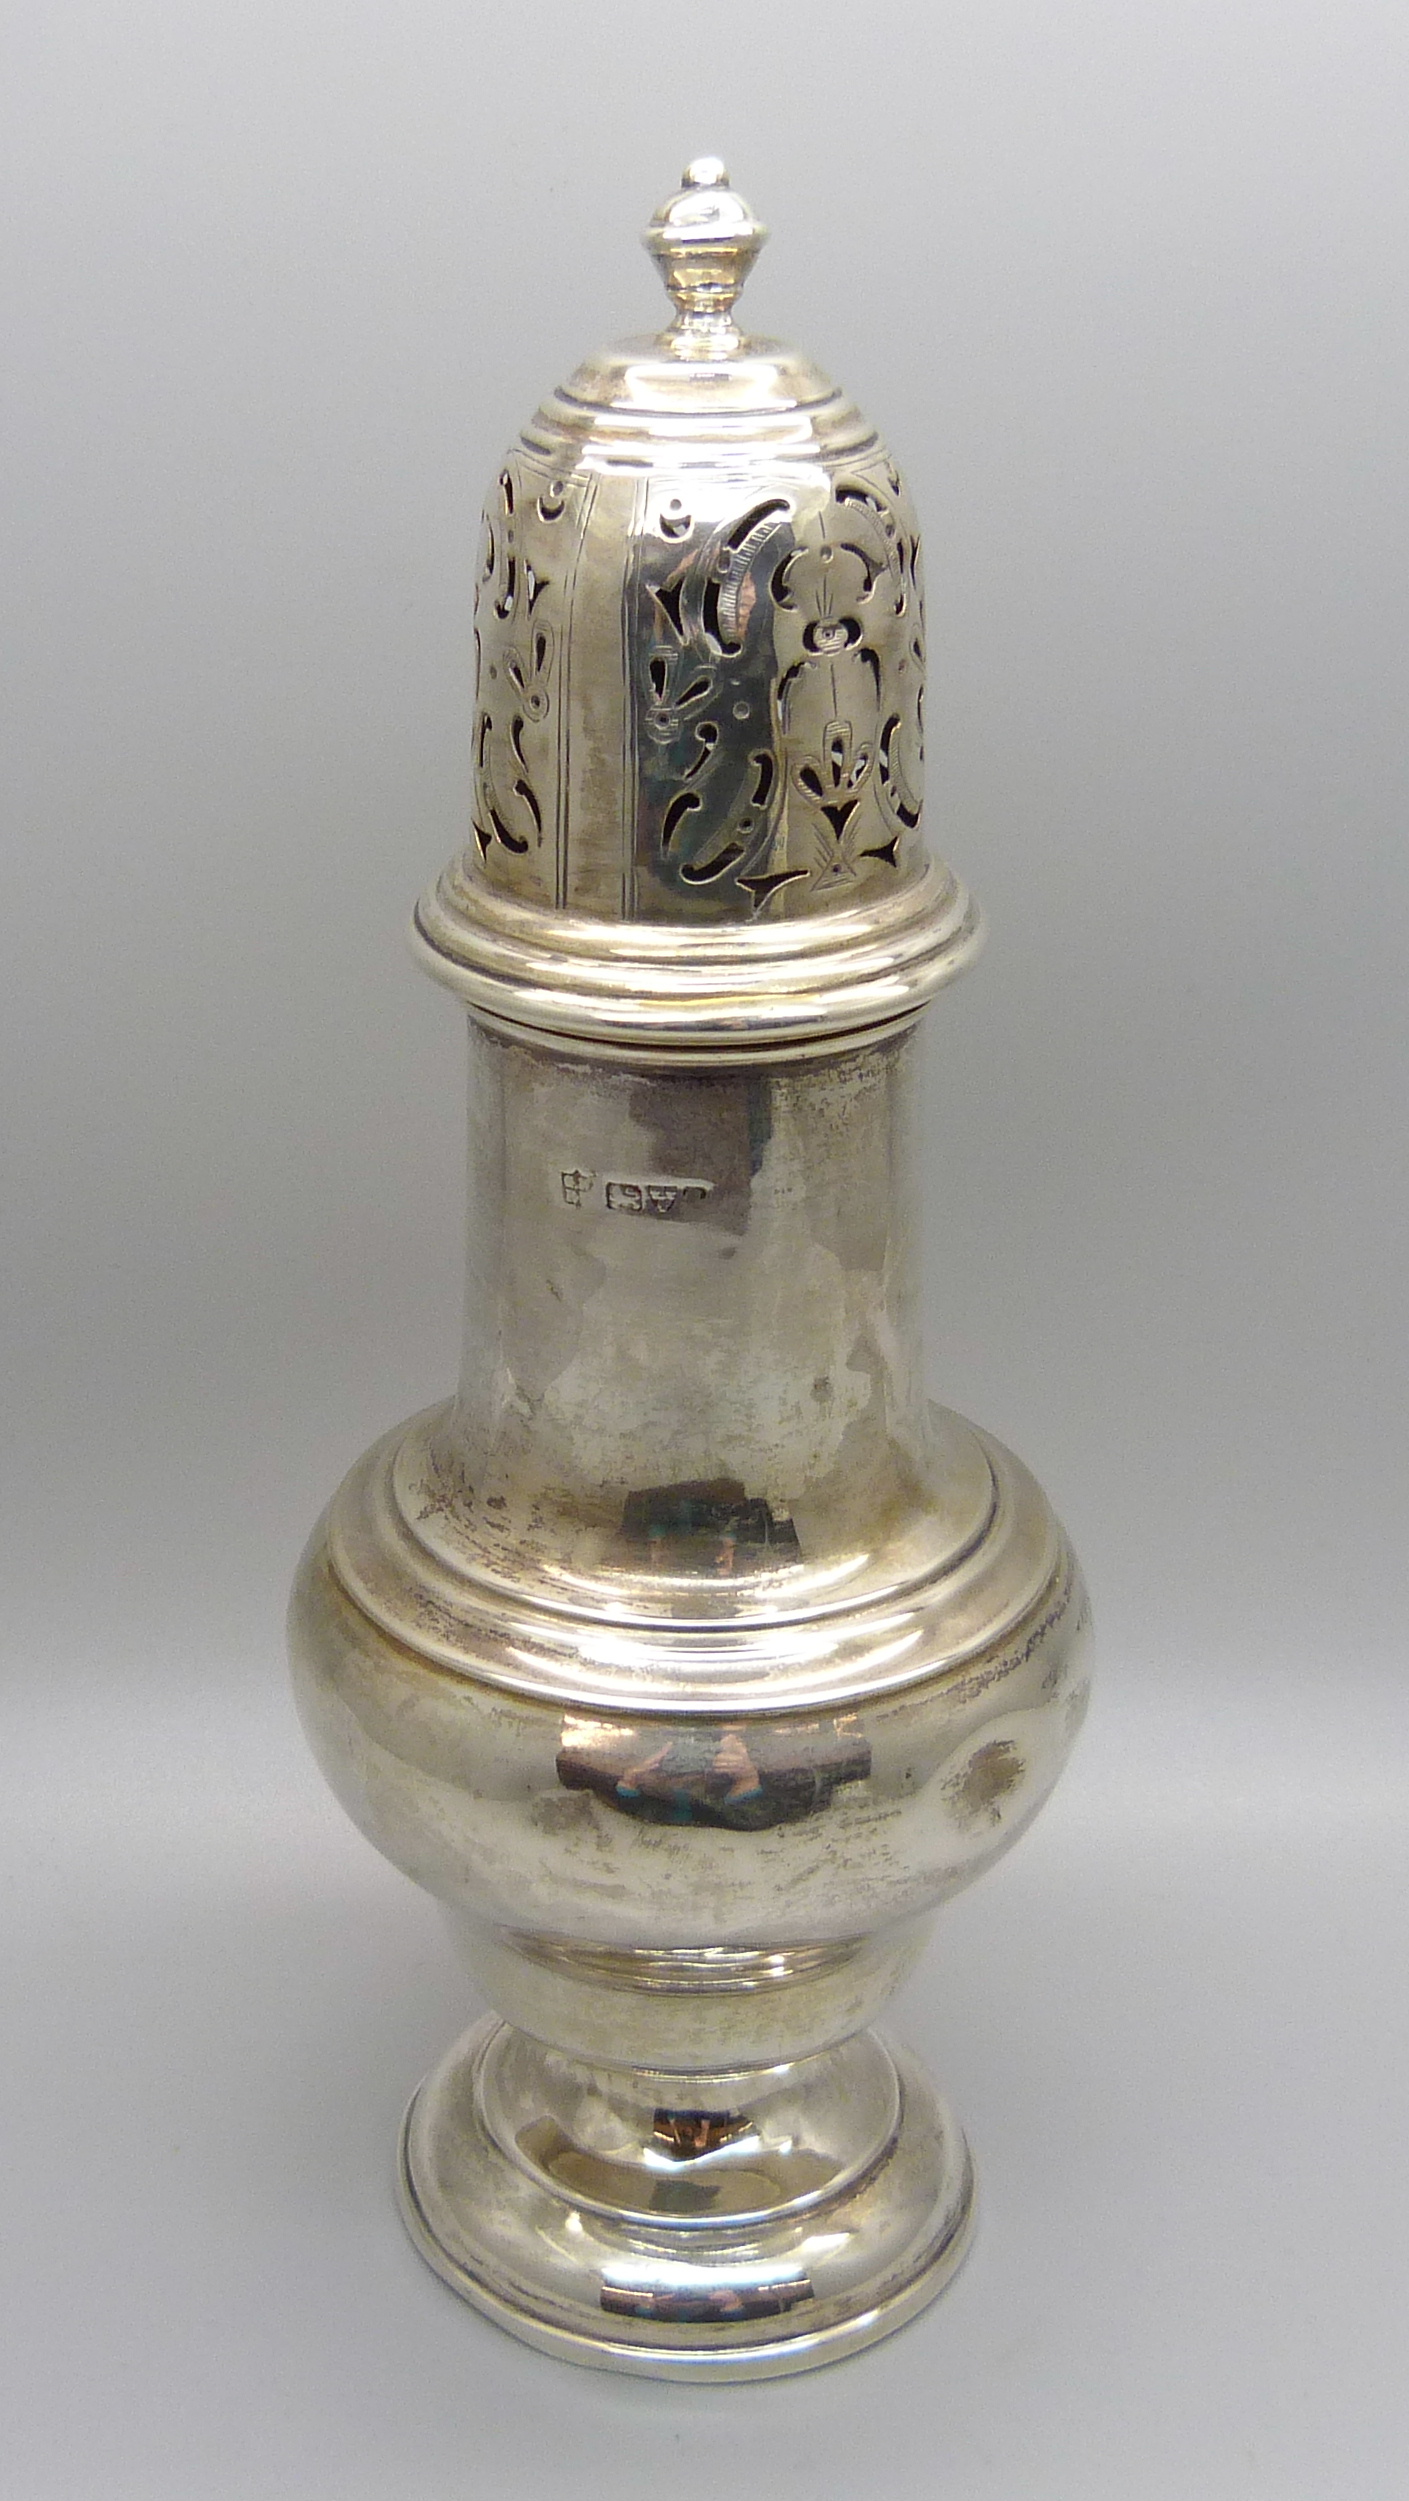 A silver castor, 145g, (with some dents)